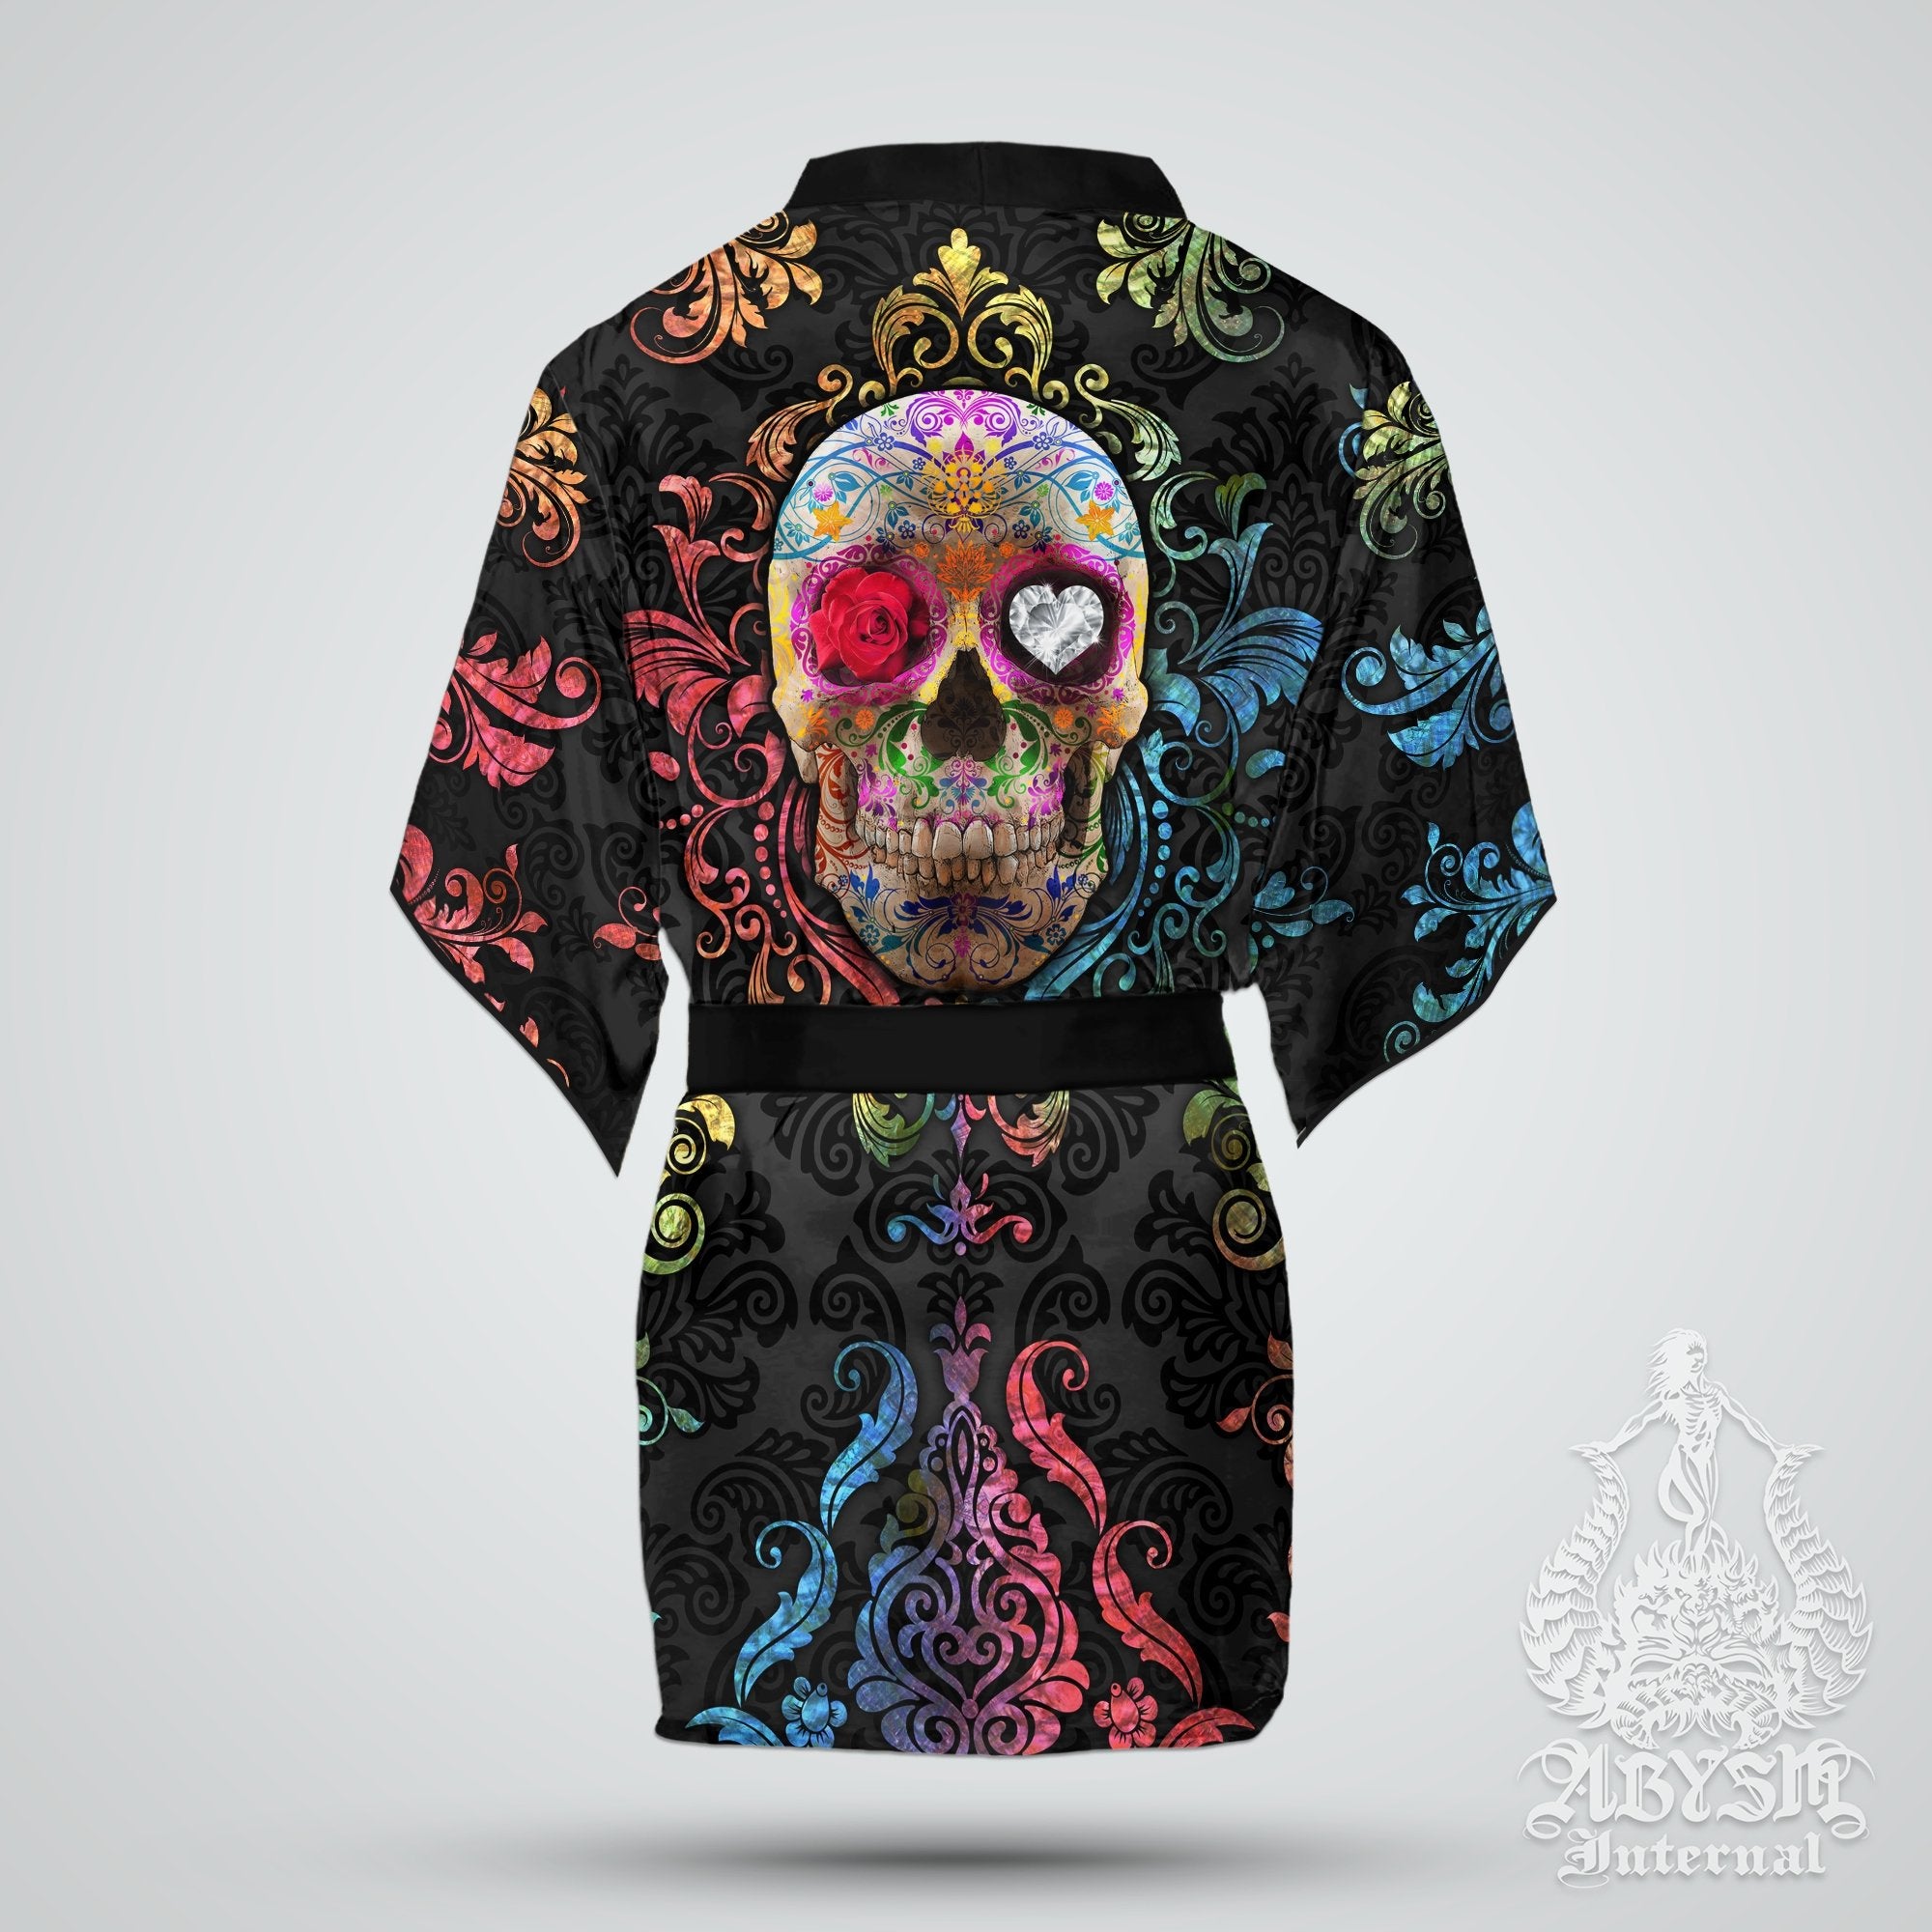 Sugar Skull Cover Up, Beach Outfit, Party Kimono, Boho Summer Festival Robe, Indie and Alternative Clothing, Unisex - Day of the Dead - Abysm Internal